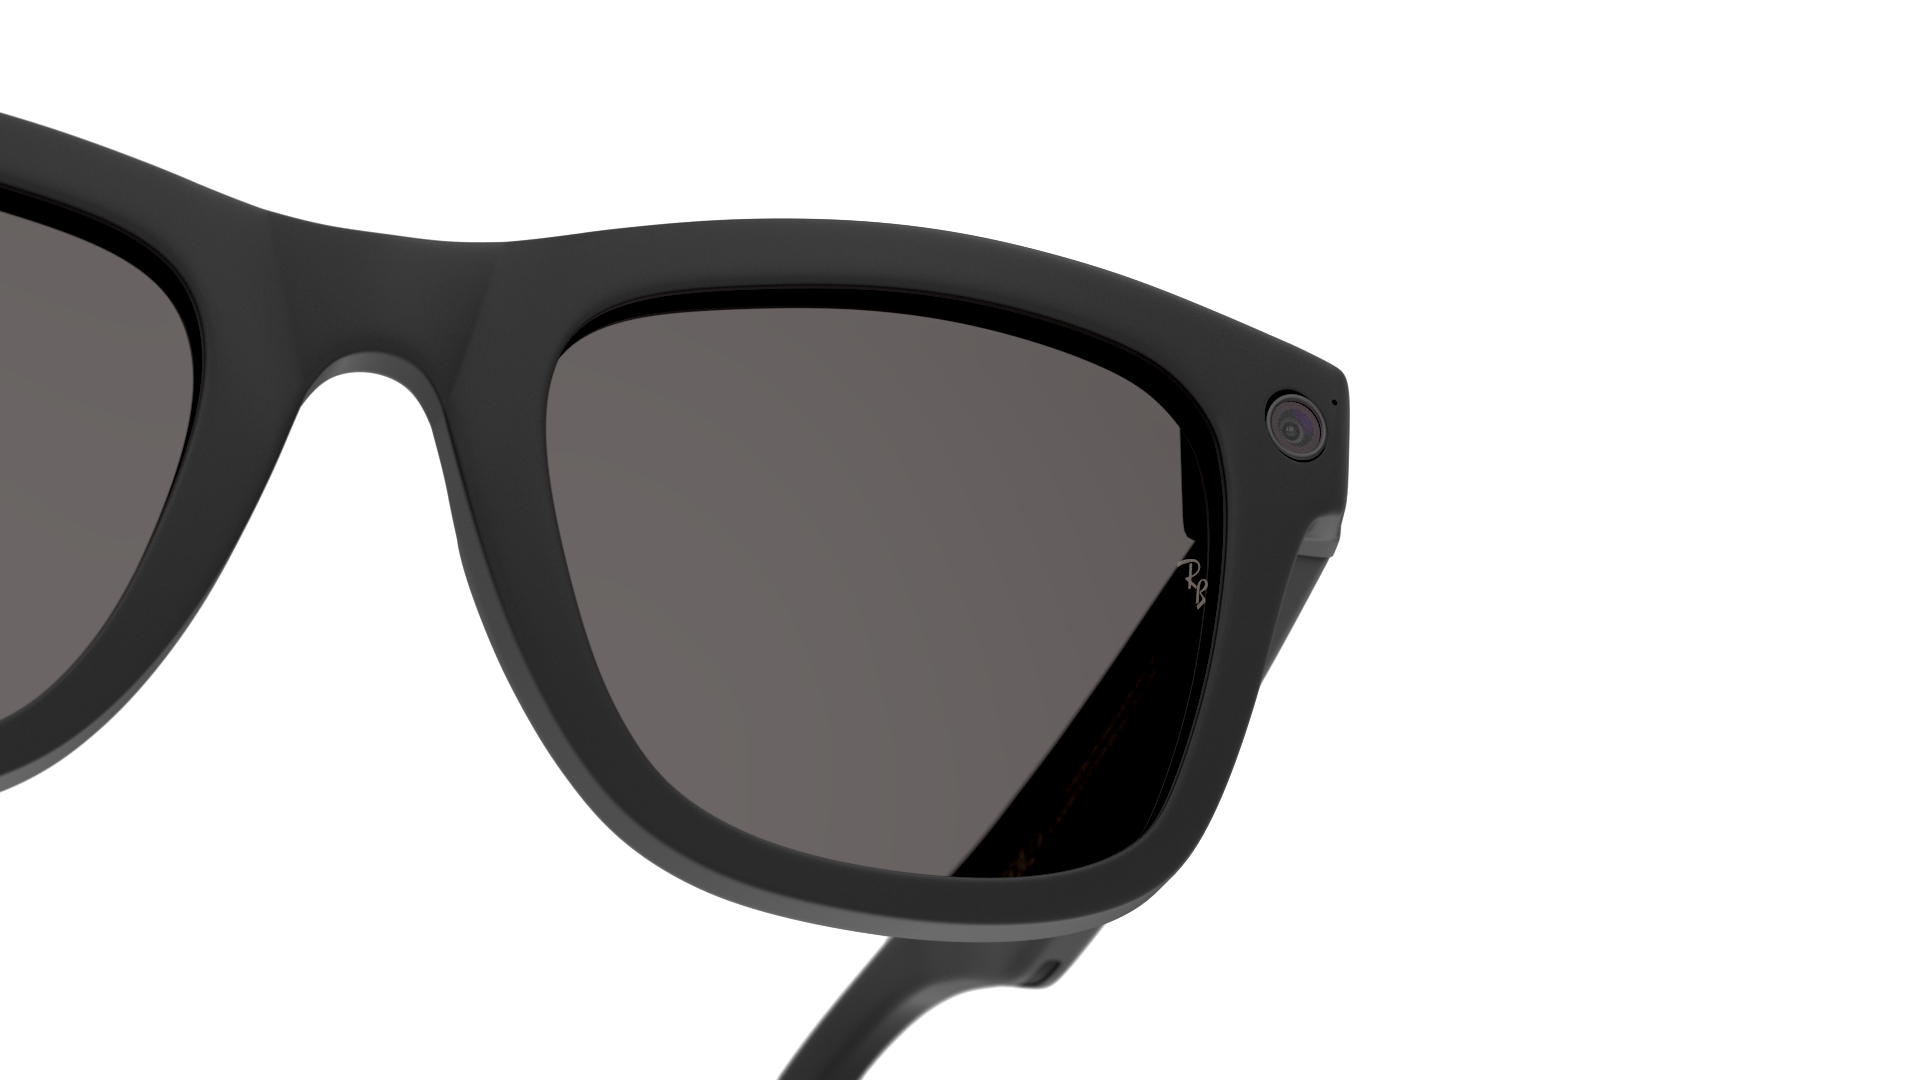 Detail01 Ray Ban Wearables 0RW4004 601S87 Gris / Negro